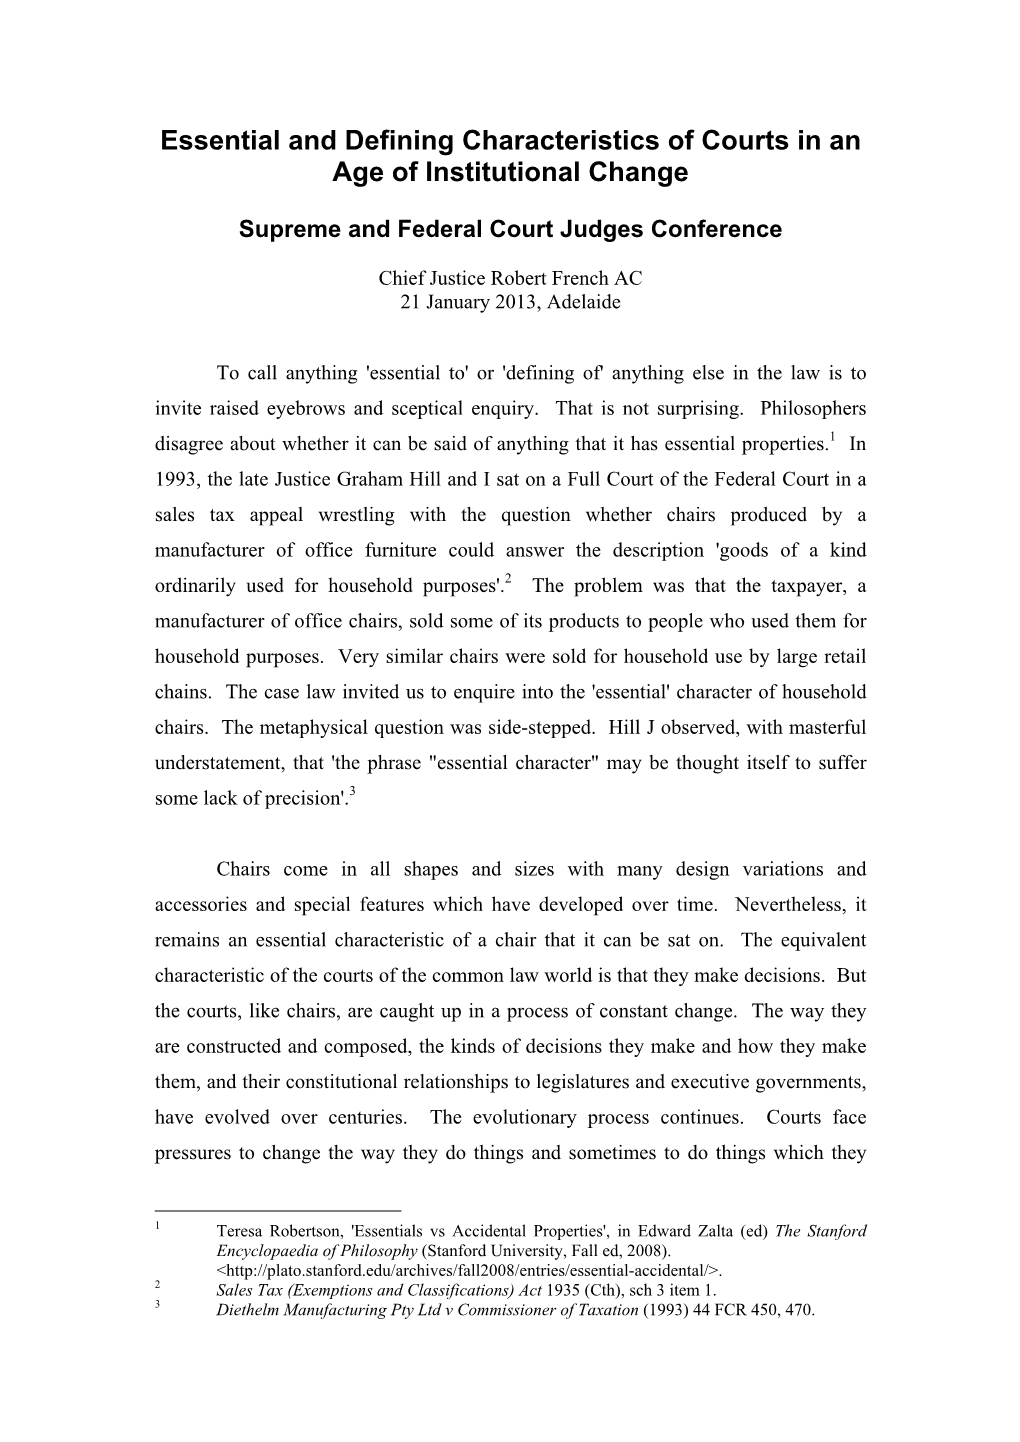 Essential and Defining Characteristics of Courts in an Age of Institutional Change